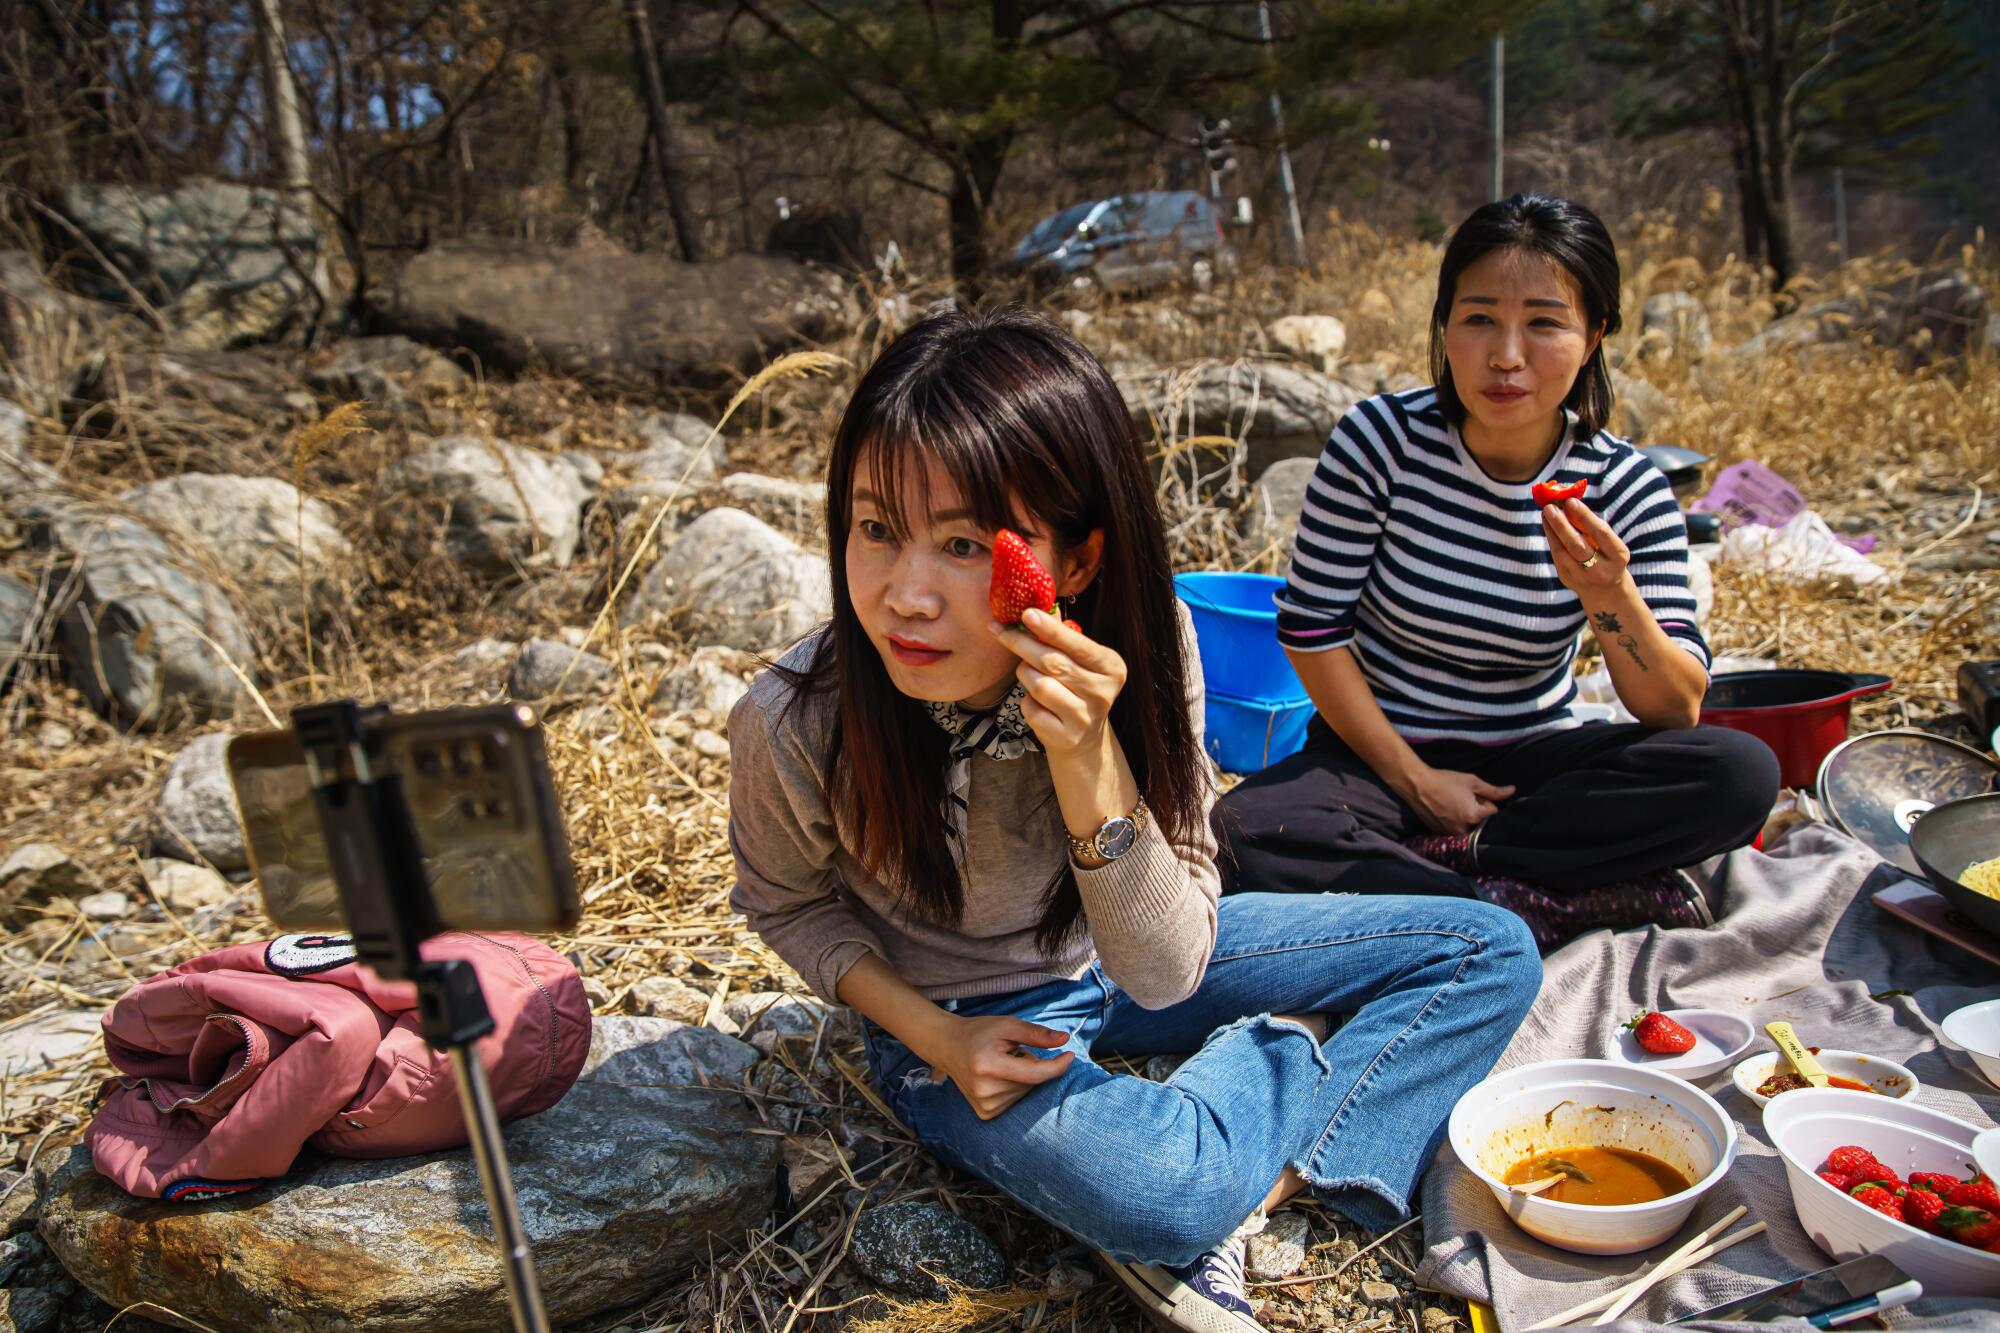 Sim Ha Yoon, left and Seok Hyeon Ju, right, hold up strawberries during a picnic